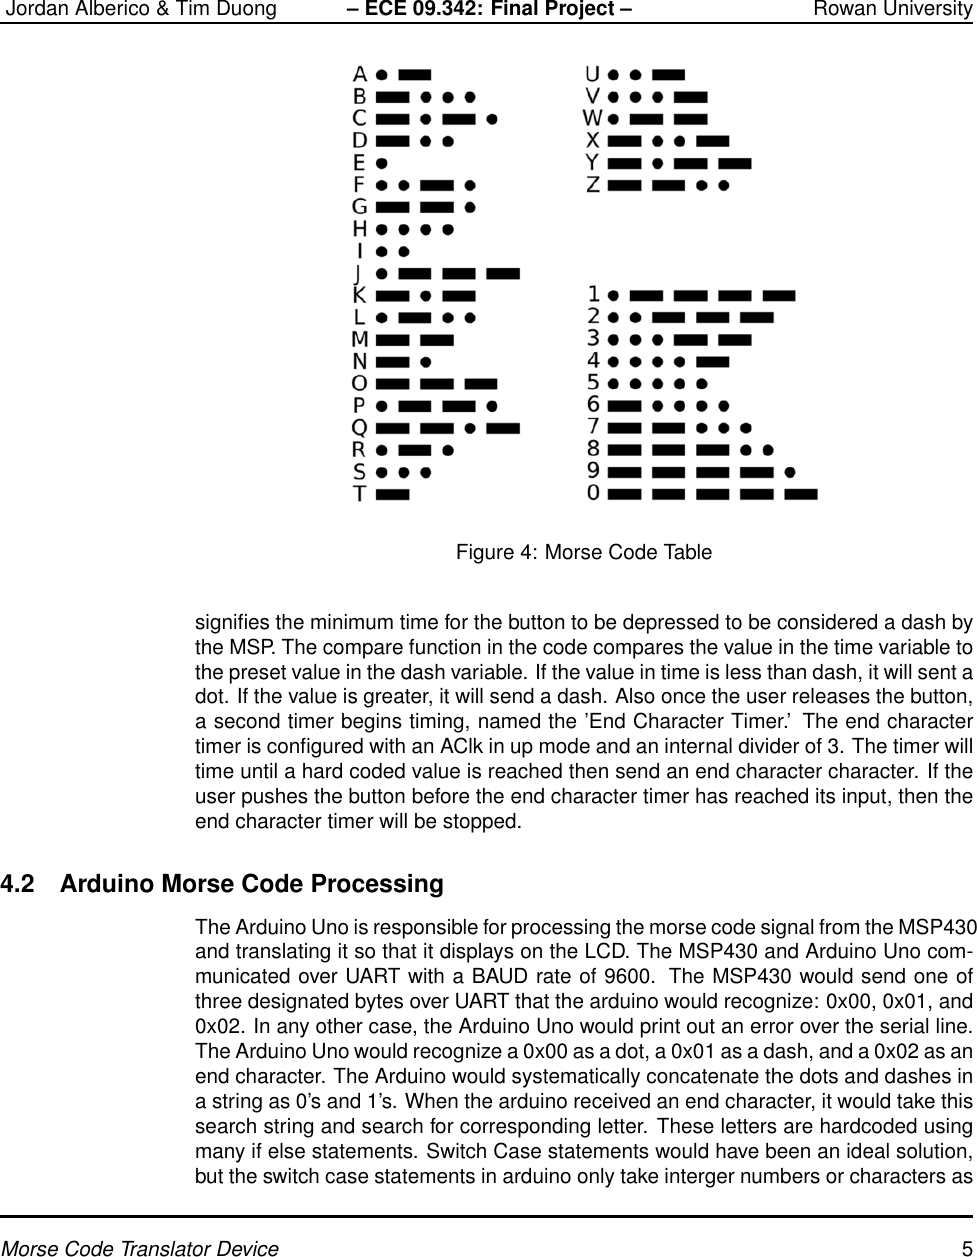 Page 5 of 7 - Morse Code Device User Guide